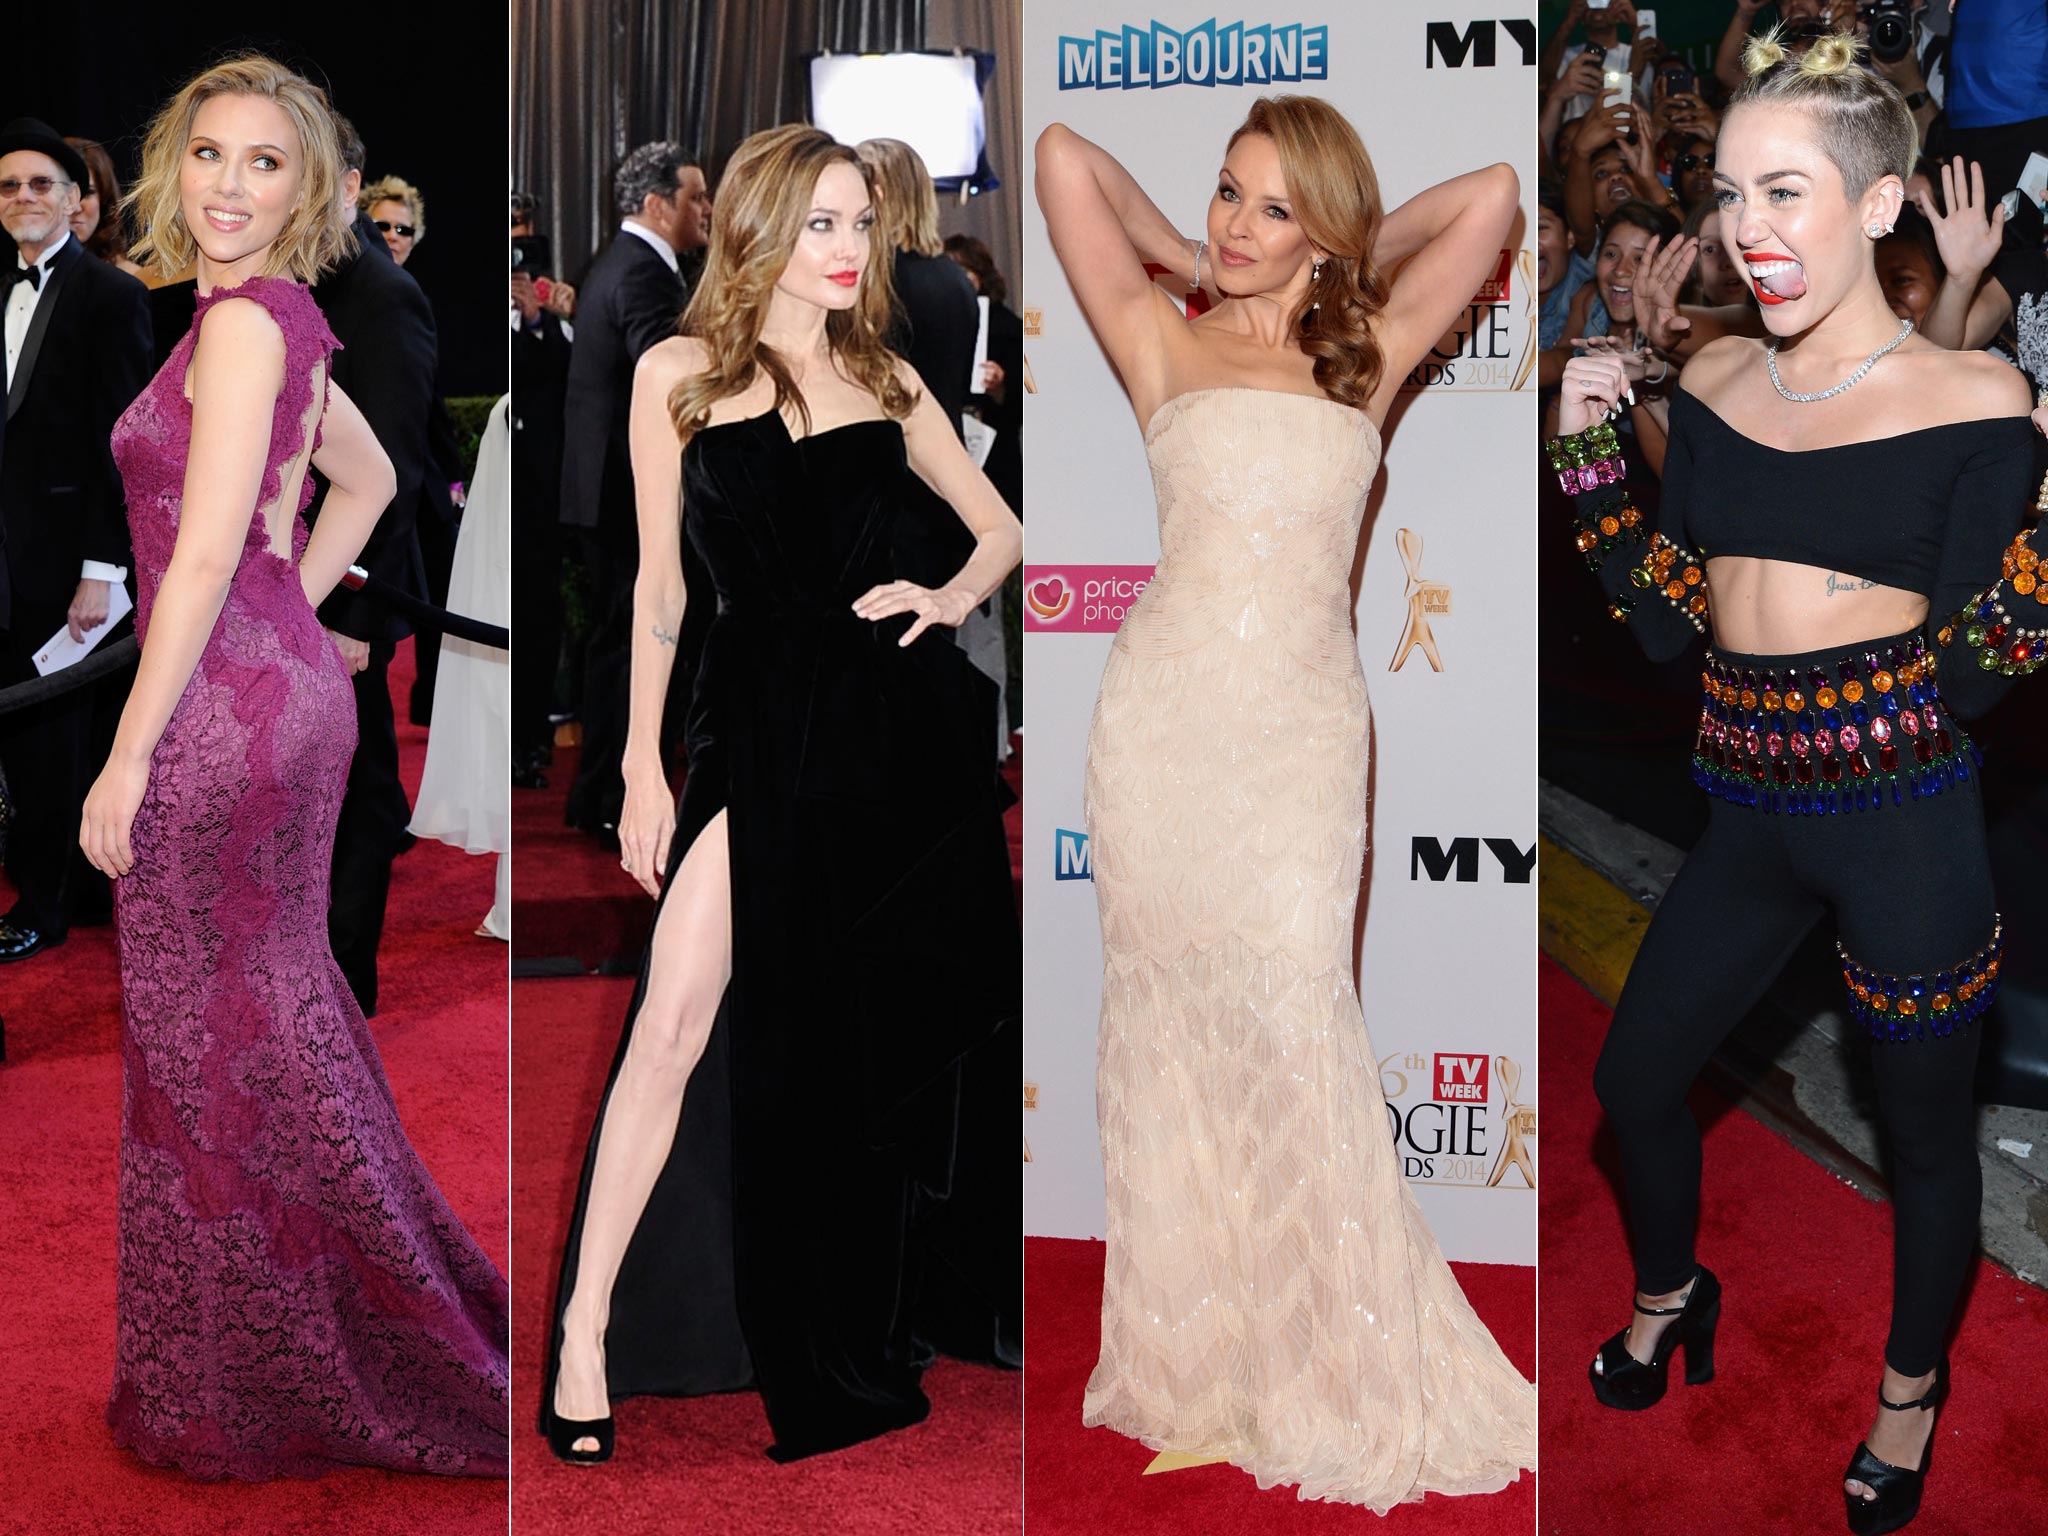 From left to right: backless: Scarlett Johansson; thigh high: Angelina Jolie; arms akimbo: Kylie Minogue; twerk out: Miley Cyrus